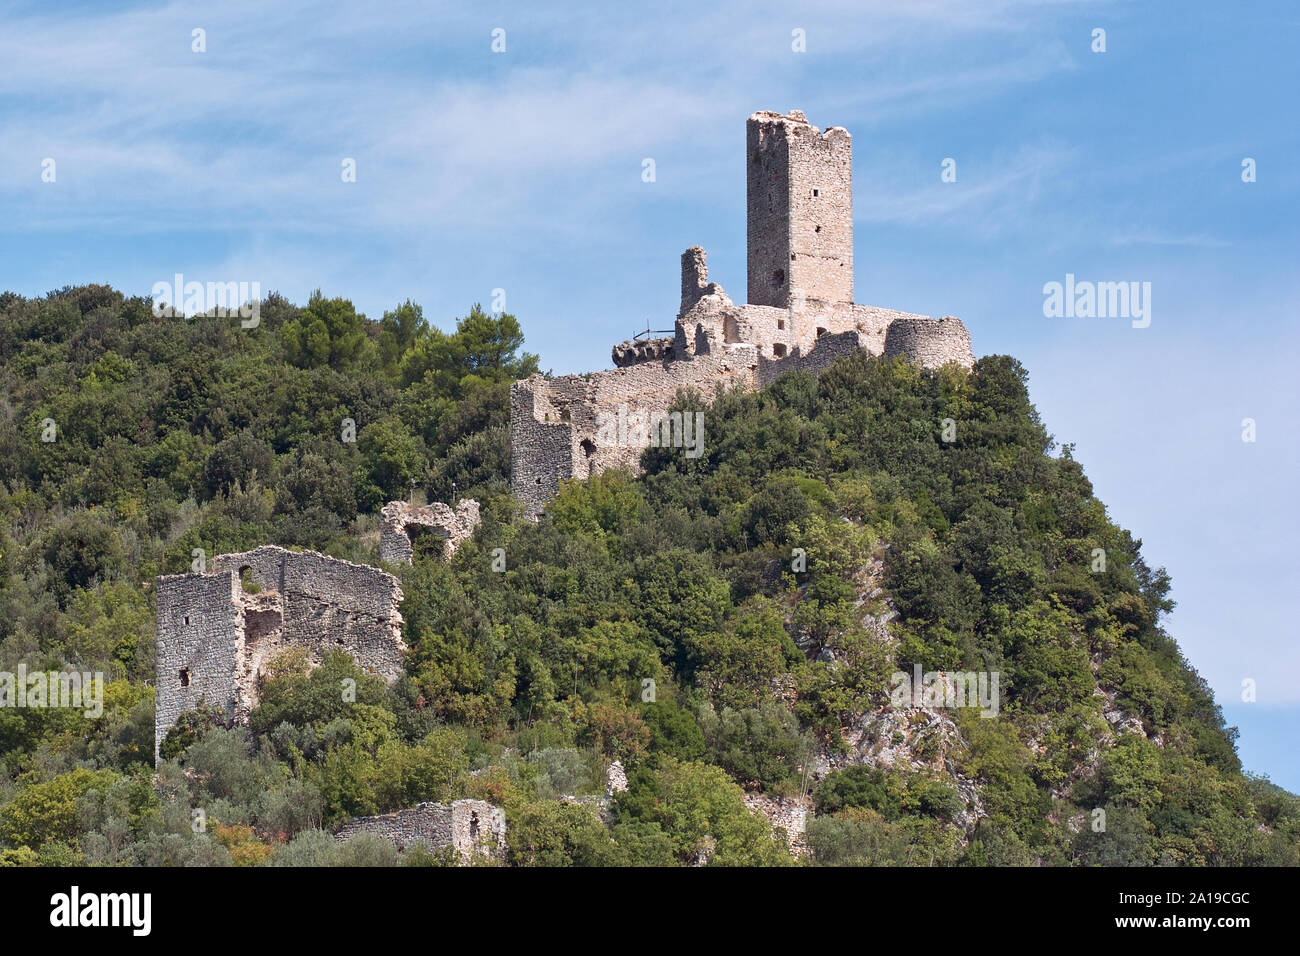 ruins of a medieval fortresses in ferentillo, province of terni, umbria, Italy, europe Stock Photo